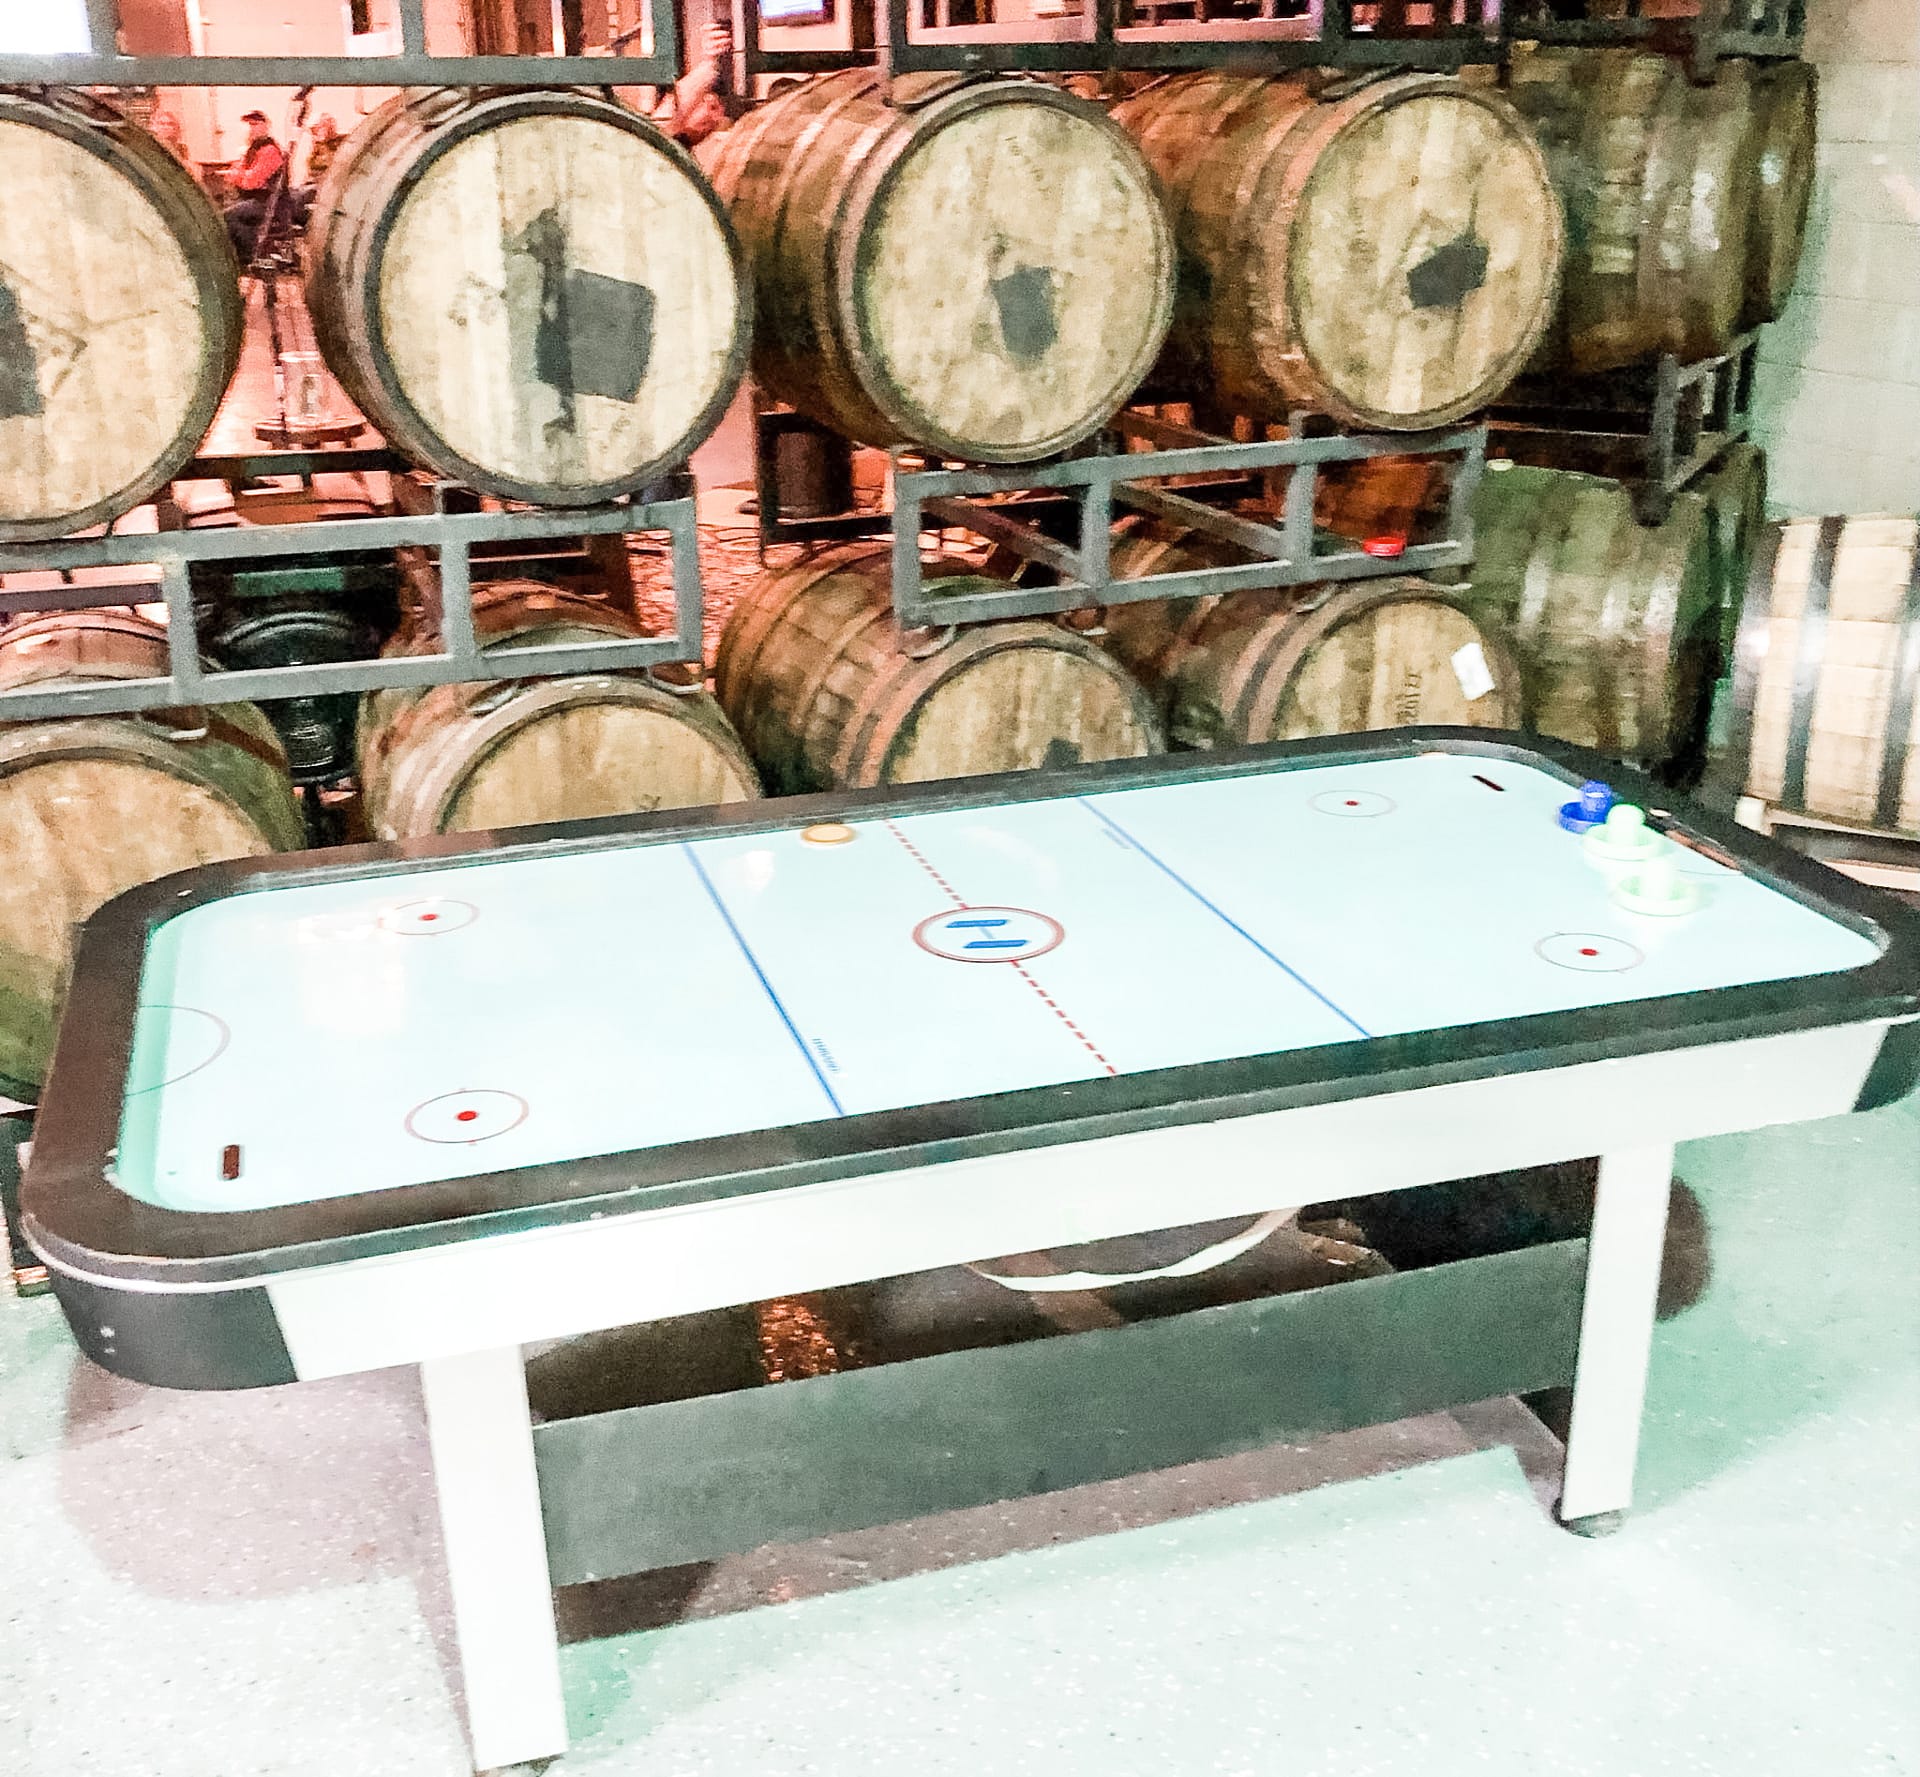 Air hockey table with beer barrels in background